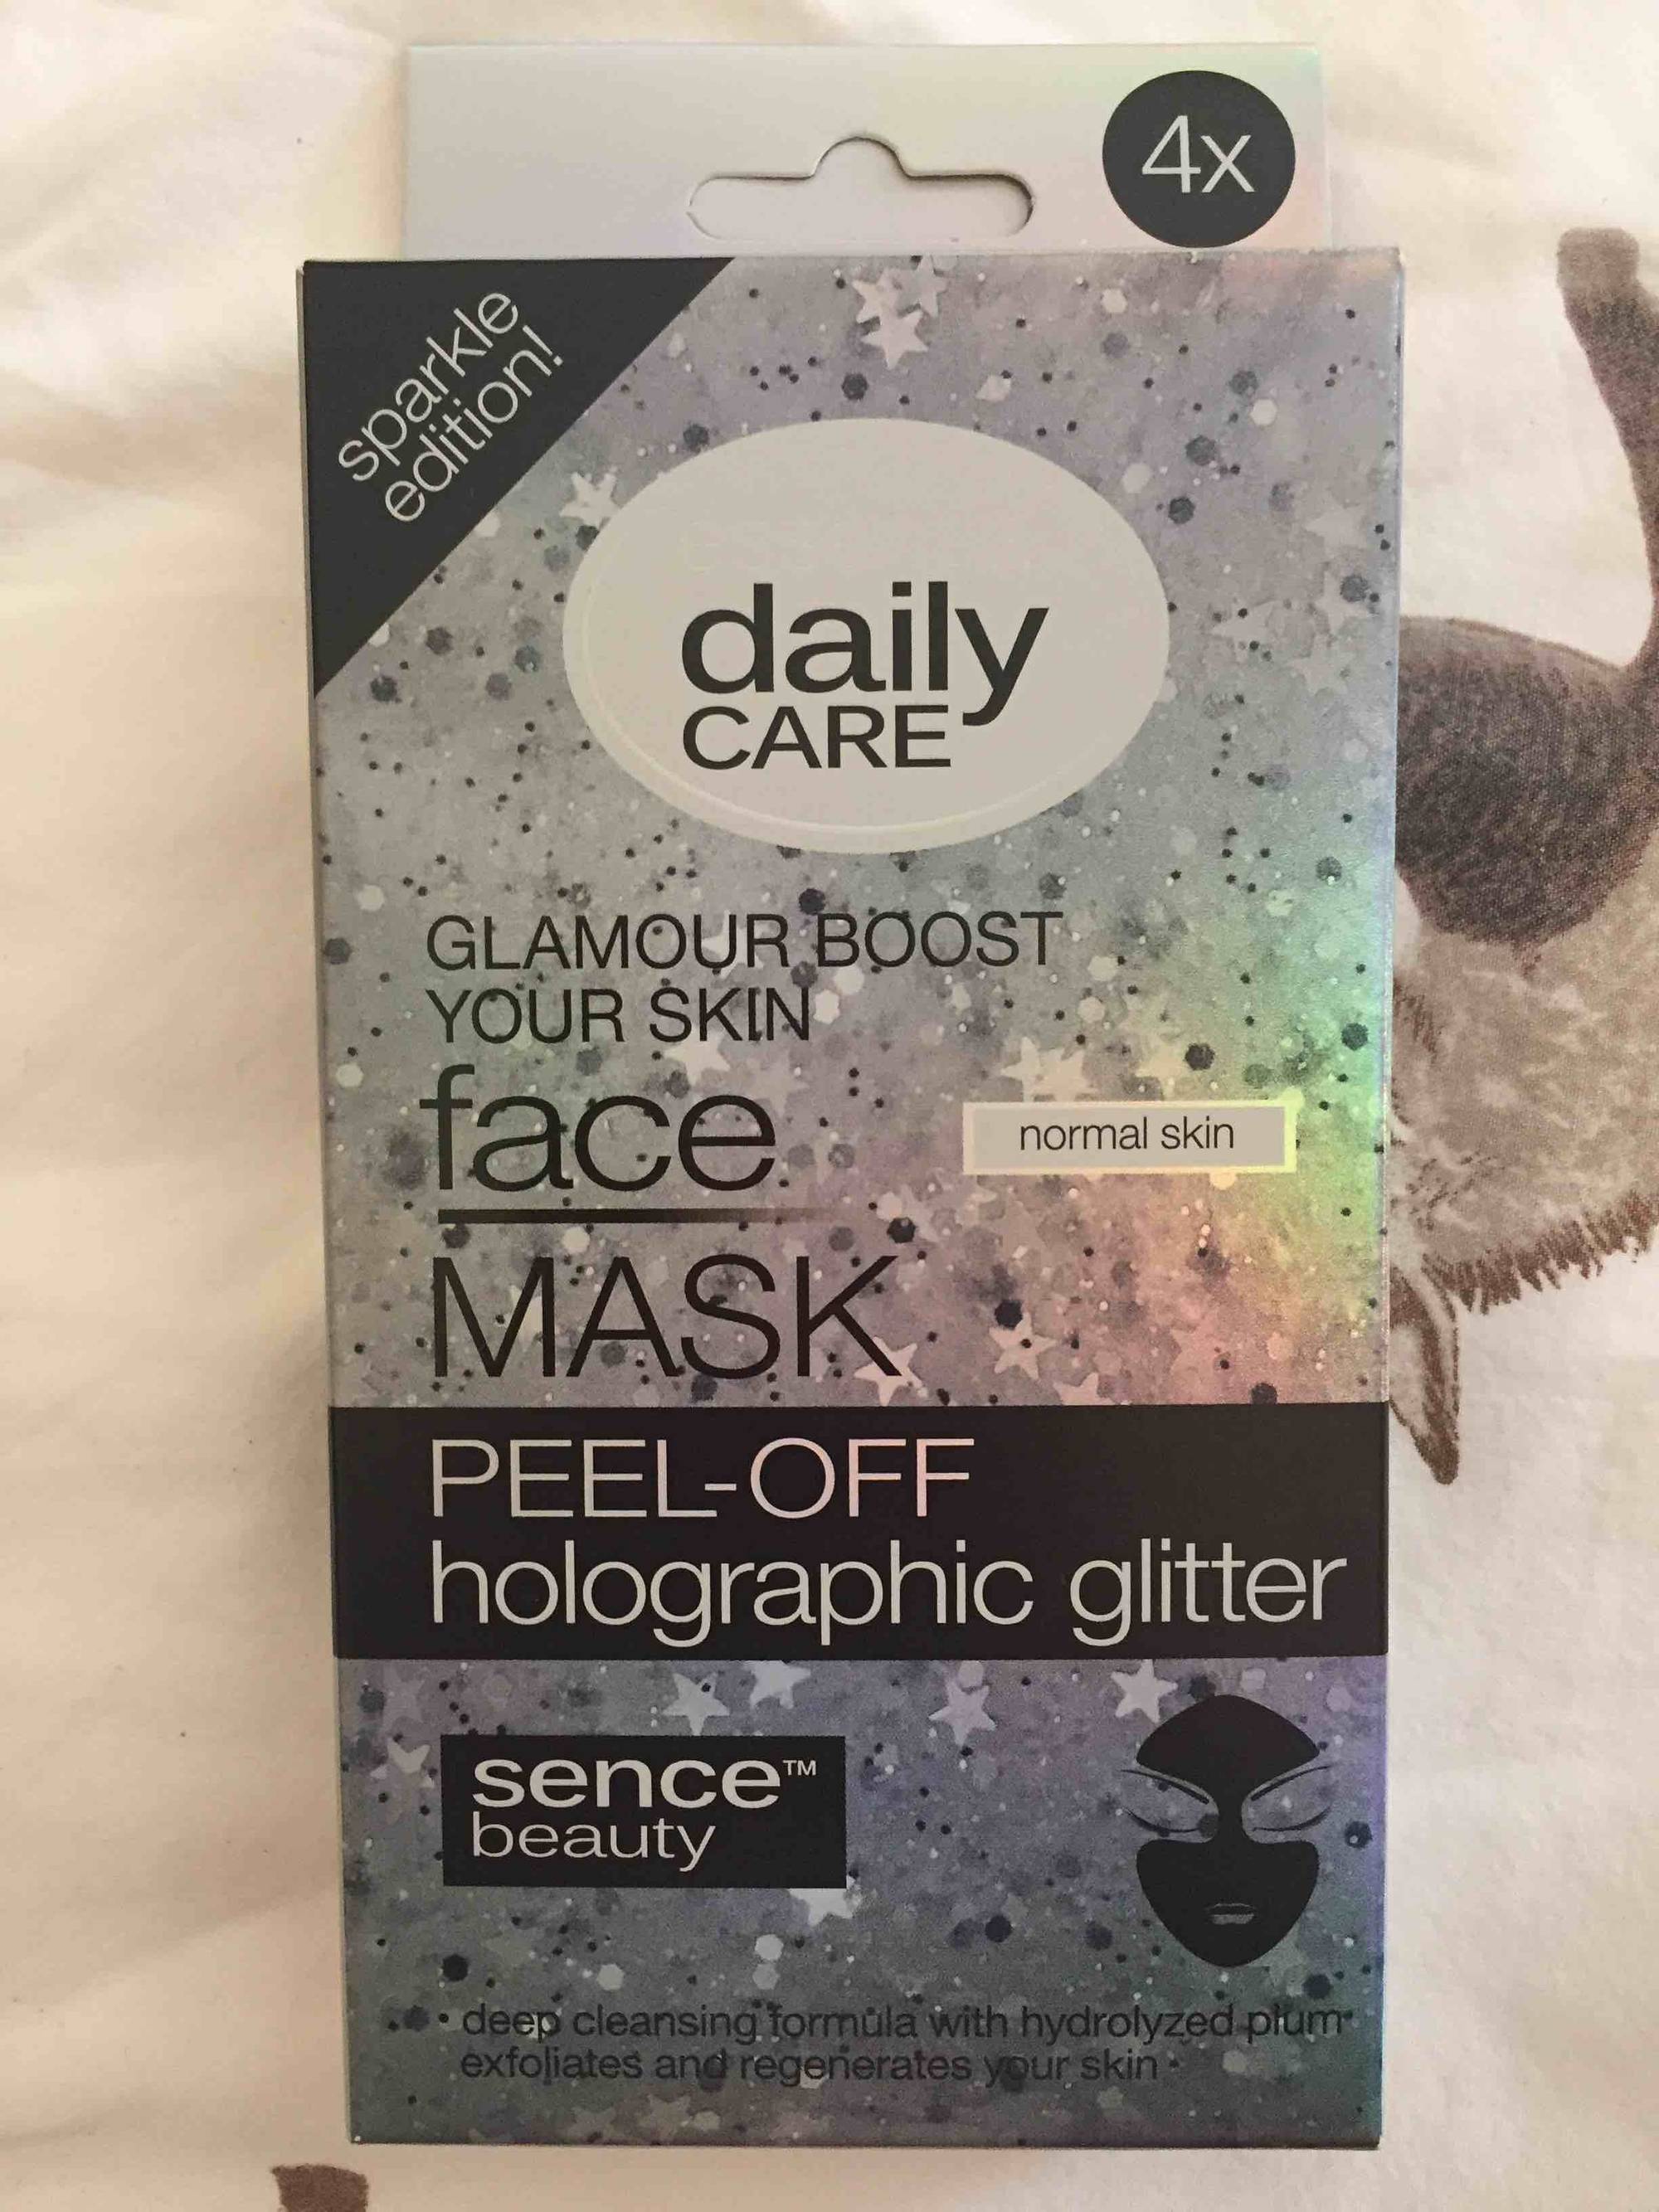 SENSE BEAUTY - Daily care - Face mask peel-off holographic glitter